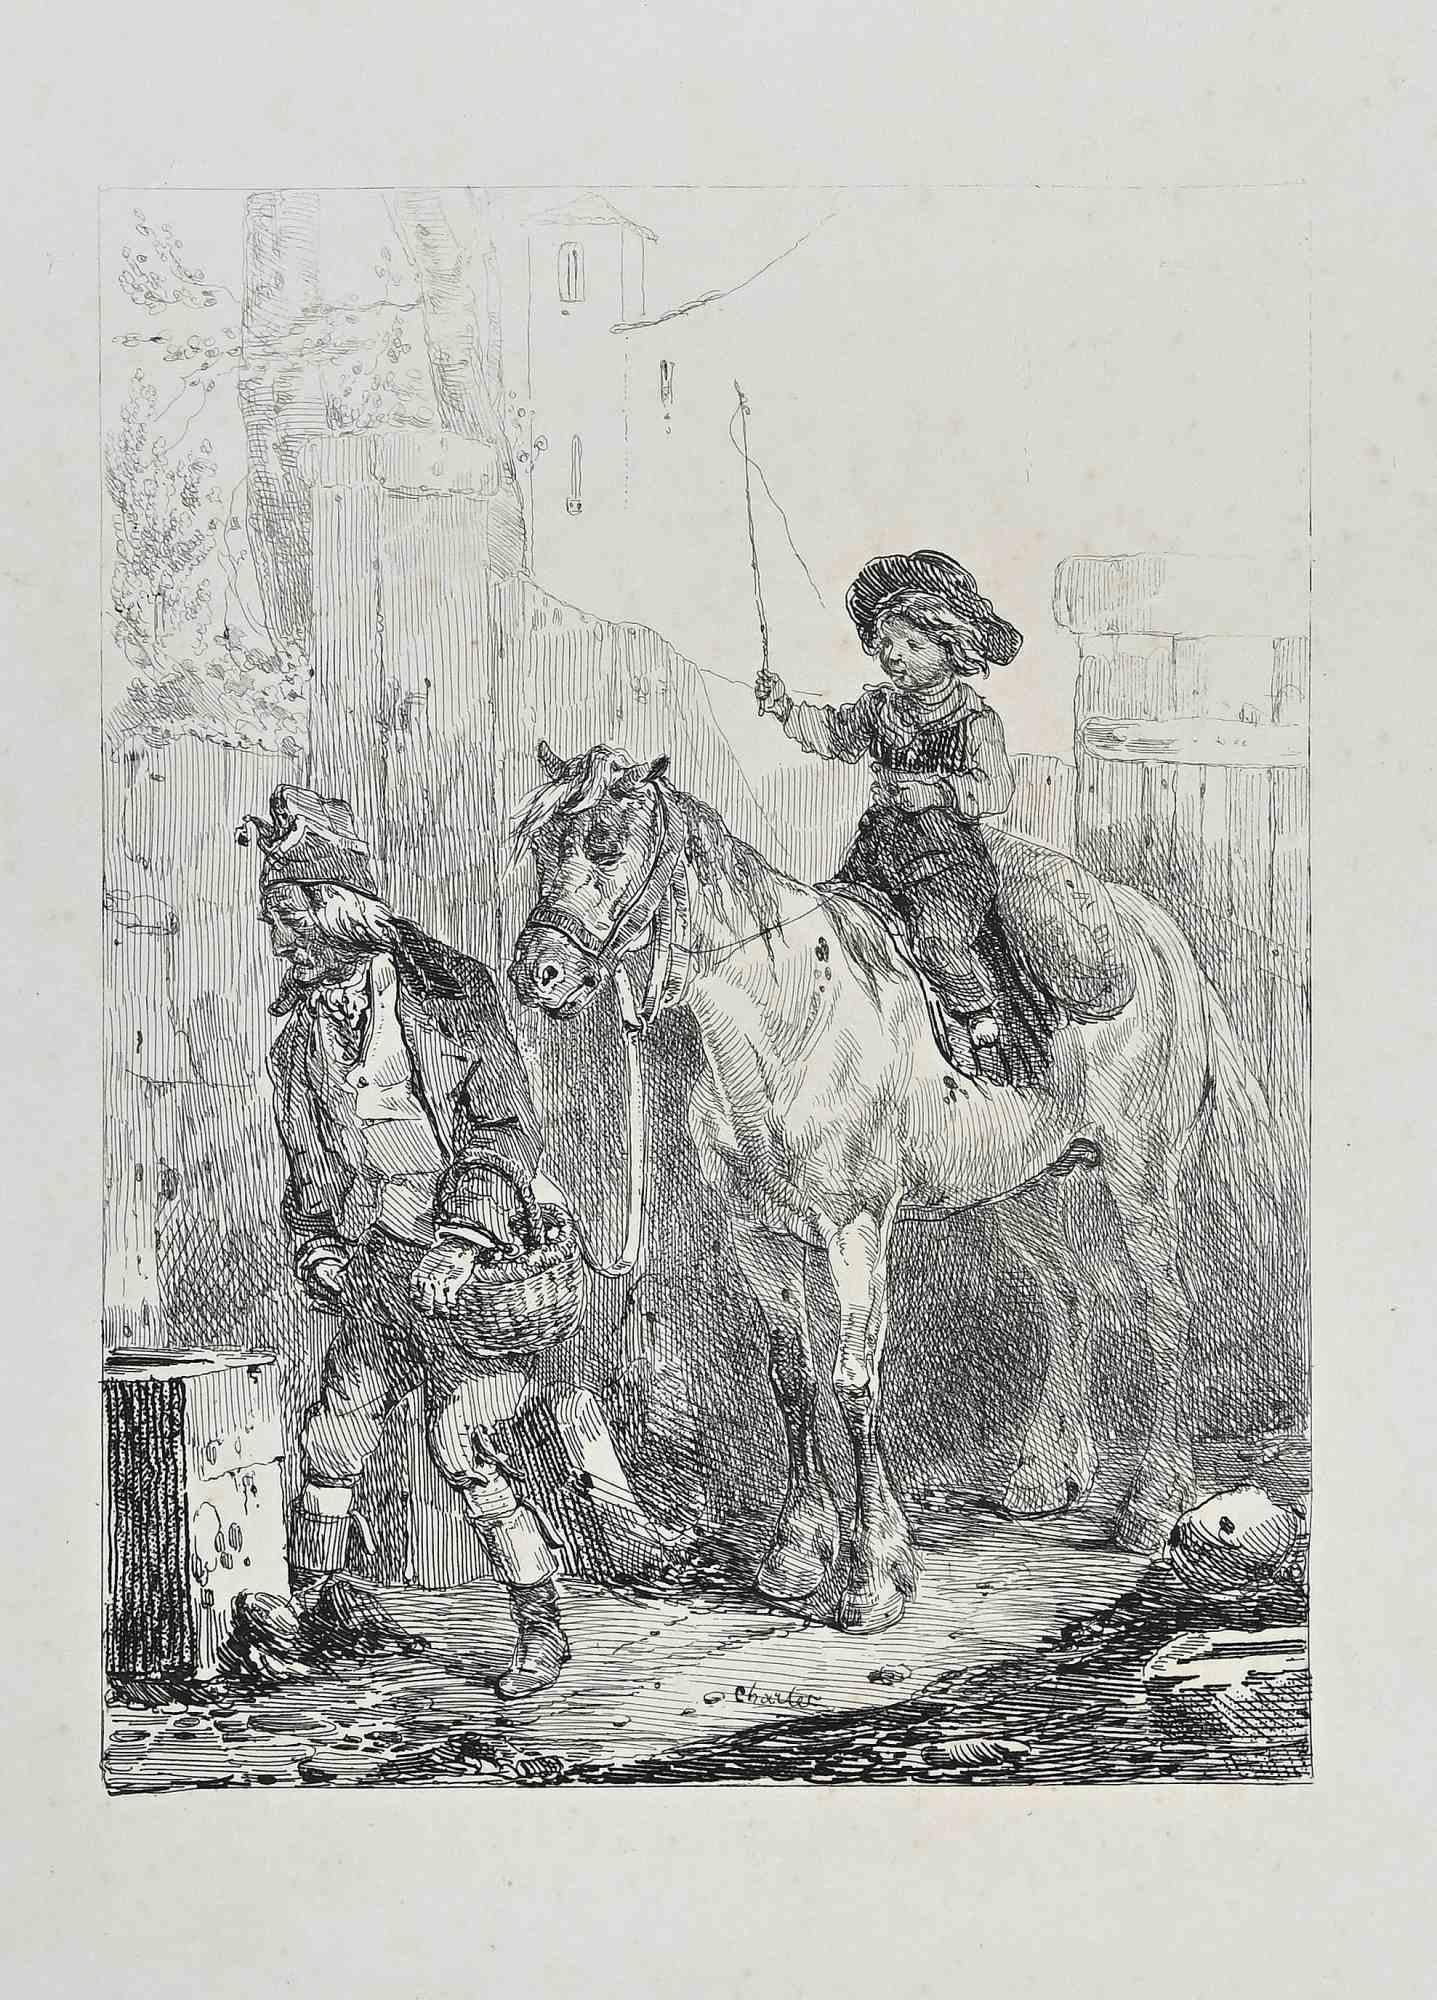 Young Boy Rider-Original Etching by  Nicolas Toussaint Charlet-Mid 19th century